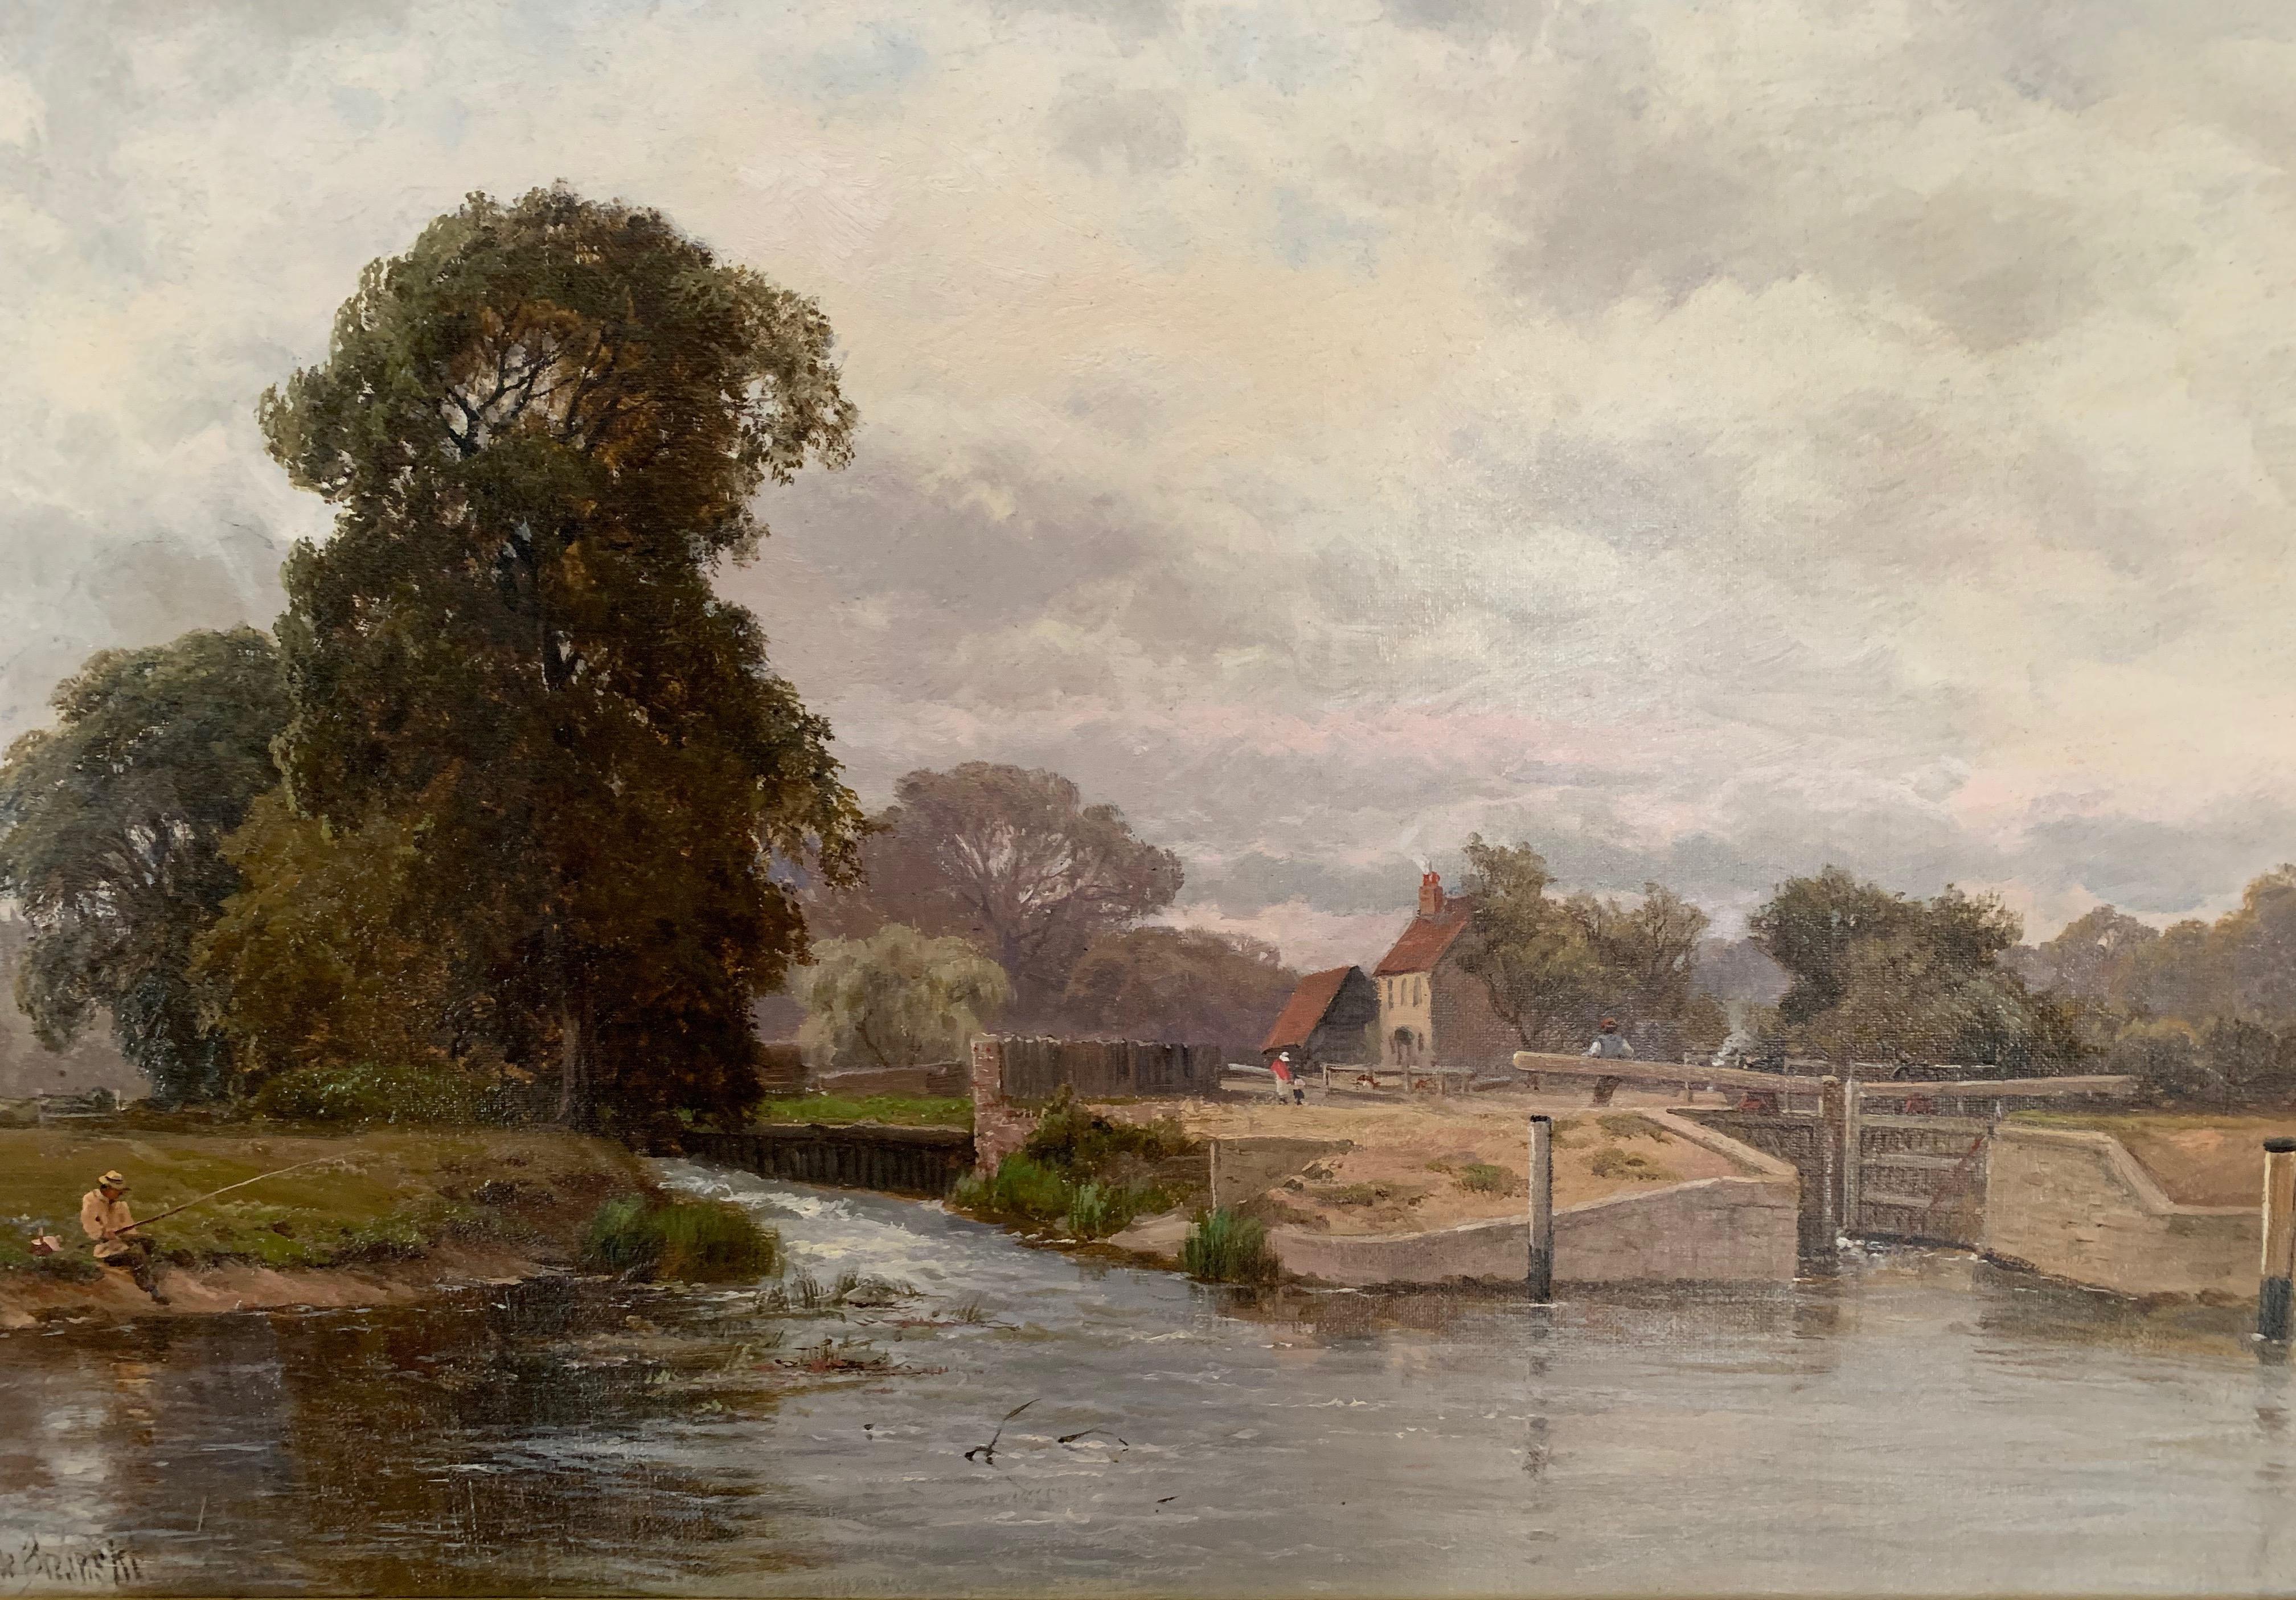 Winsor Lock, On the River Thames, Near London, England - Victorian Painting by Alfred de Breanski Sr.